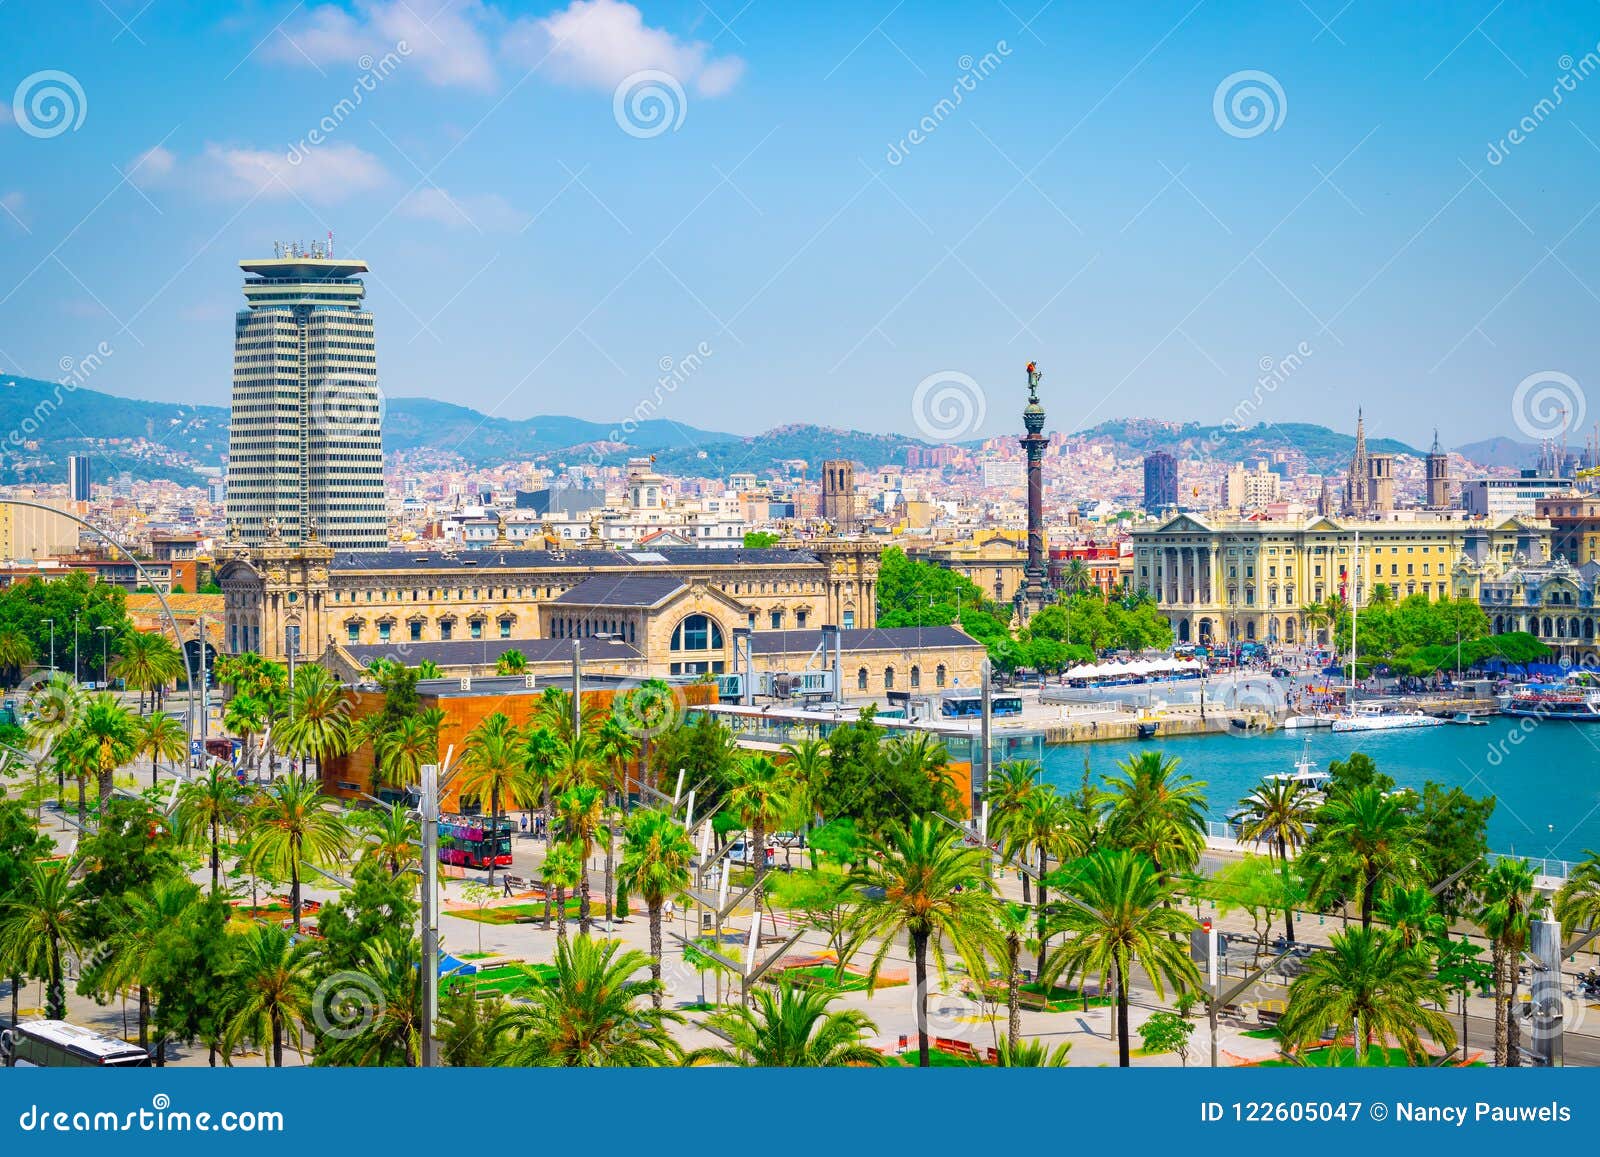 Cruise Port of Barcelona, Spain Stock Image - Image of building ...